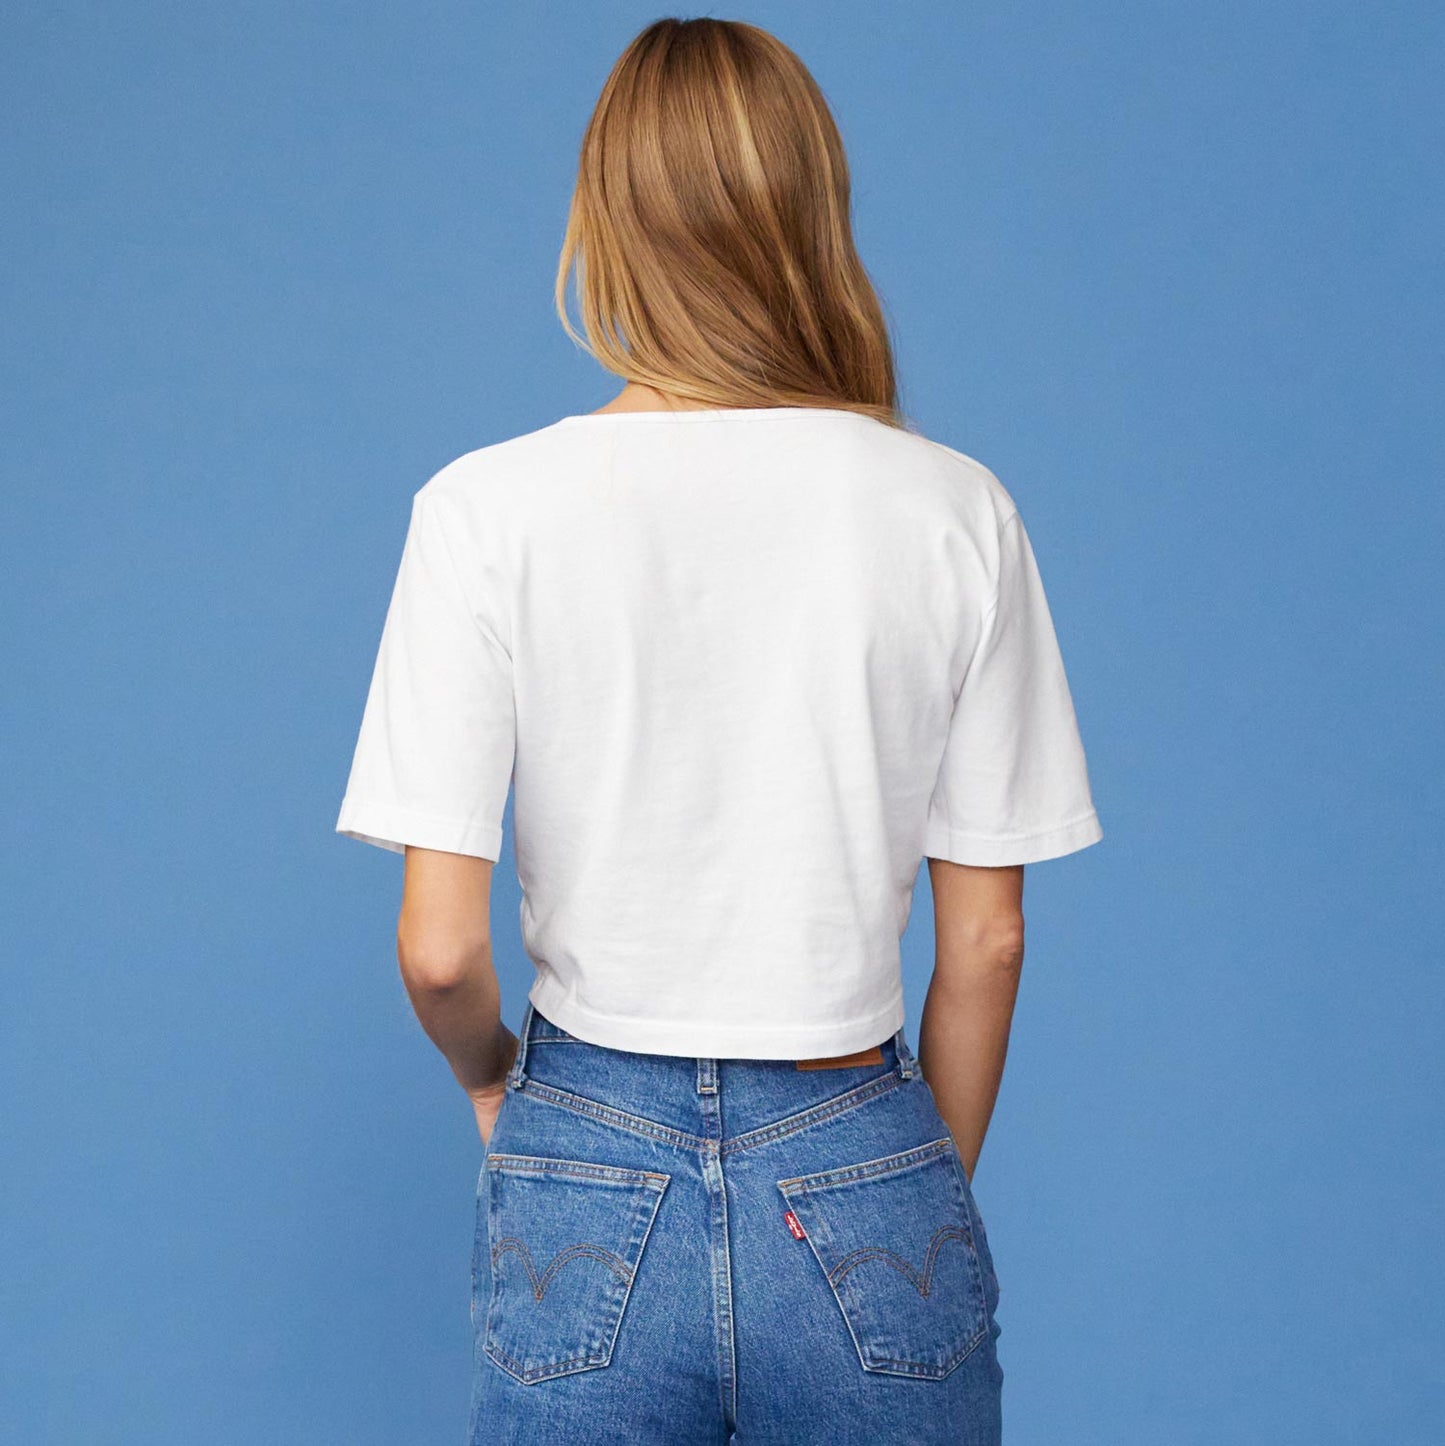 Back View of model wearing the Front Twist Top in White